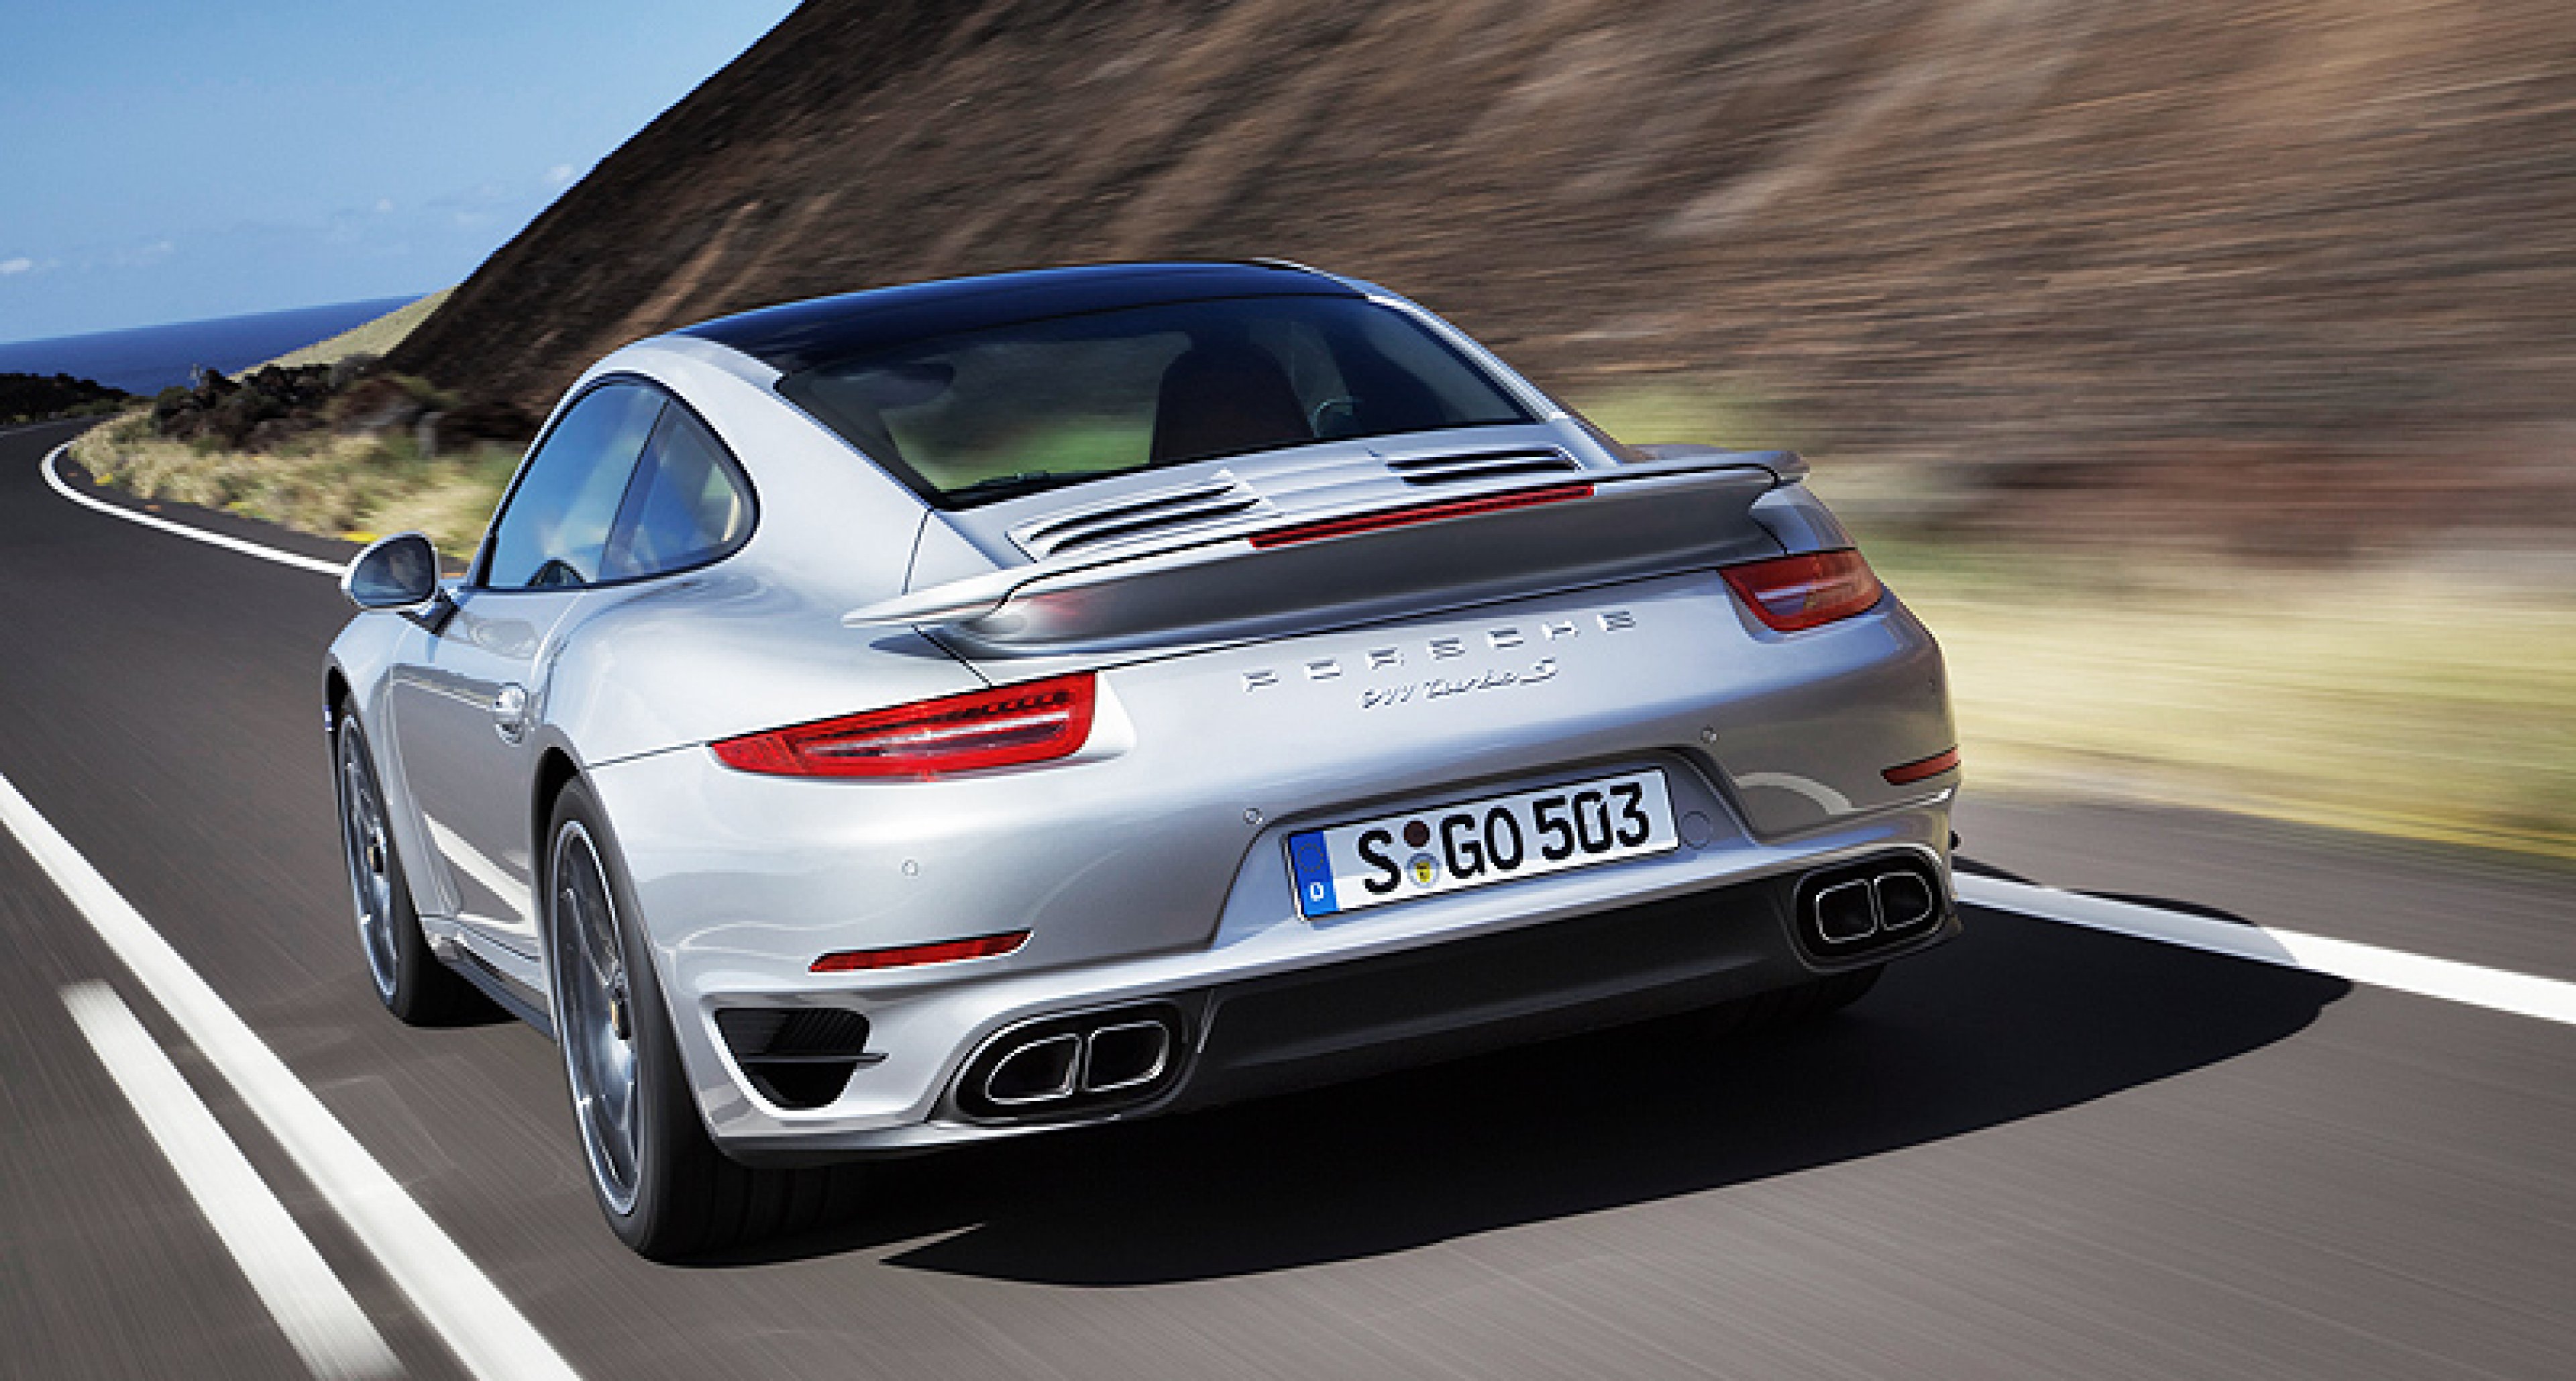 The New Porsche 911 Turbo Back For Its Crown Classic